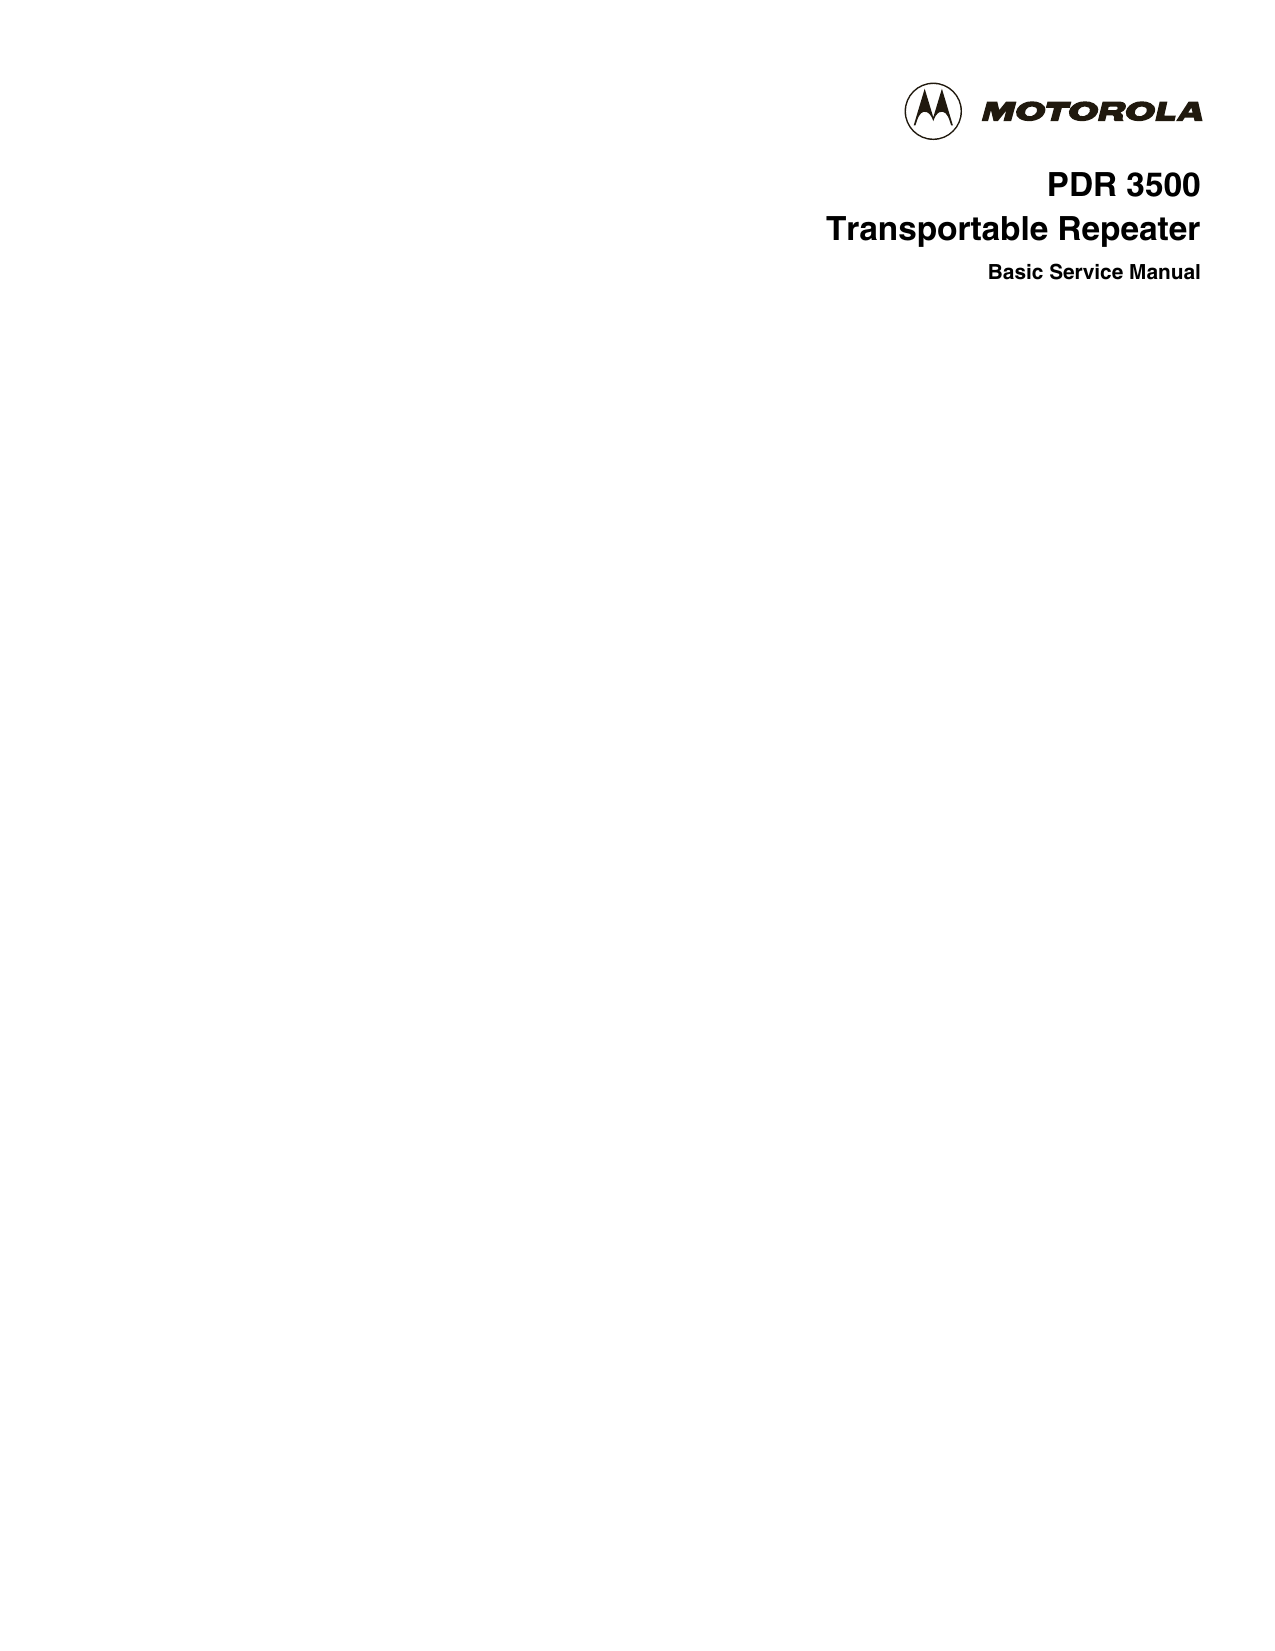  1  PDR 3500Transportable Repeater Basic Service Manual